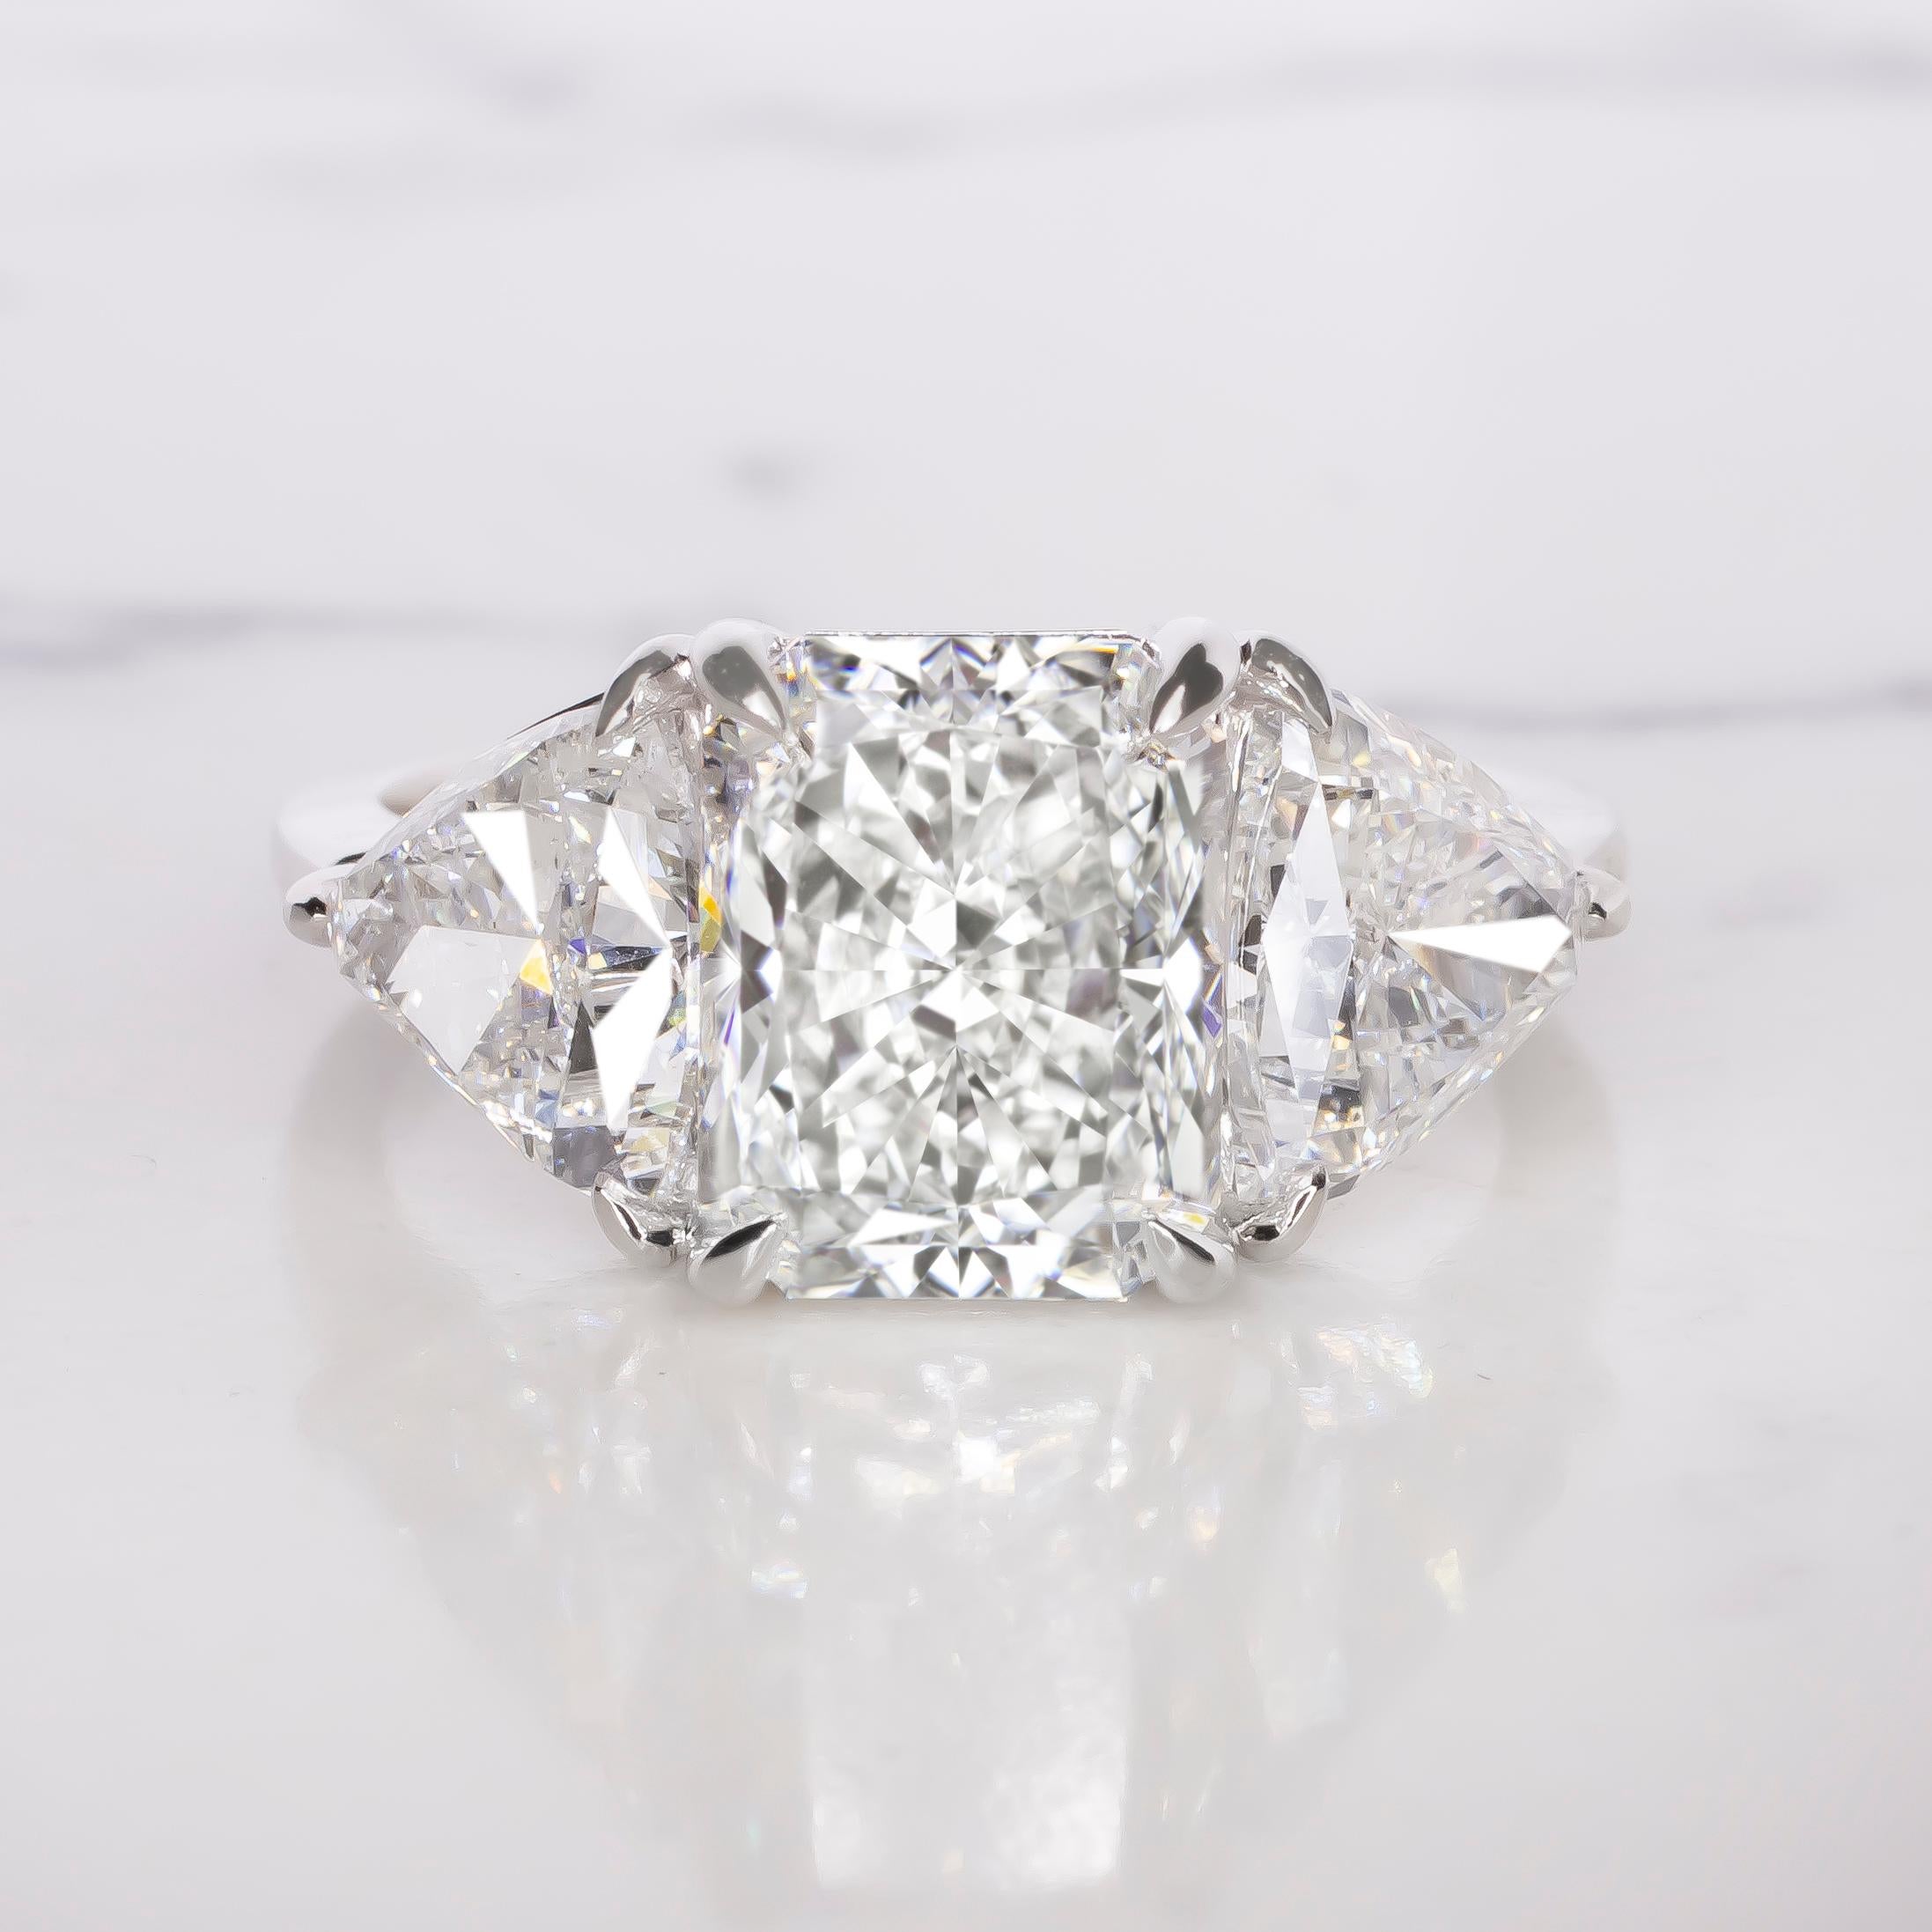 Embrace sophistication and elegance with this GIA Certified 3.01 Carat Square Radiant Cut Diamond Ring, featuring exquisite trillion-cut diamonds. At the heart of this mesmerizing ring lies a stunning 3.01-carat square radiant cut diamond, certified